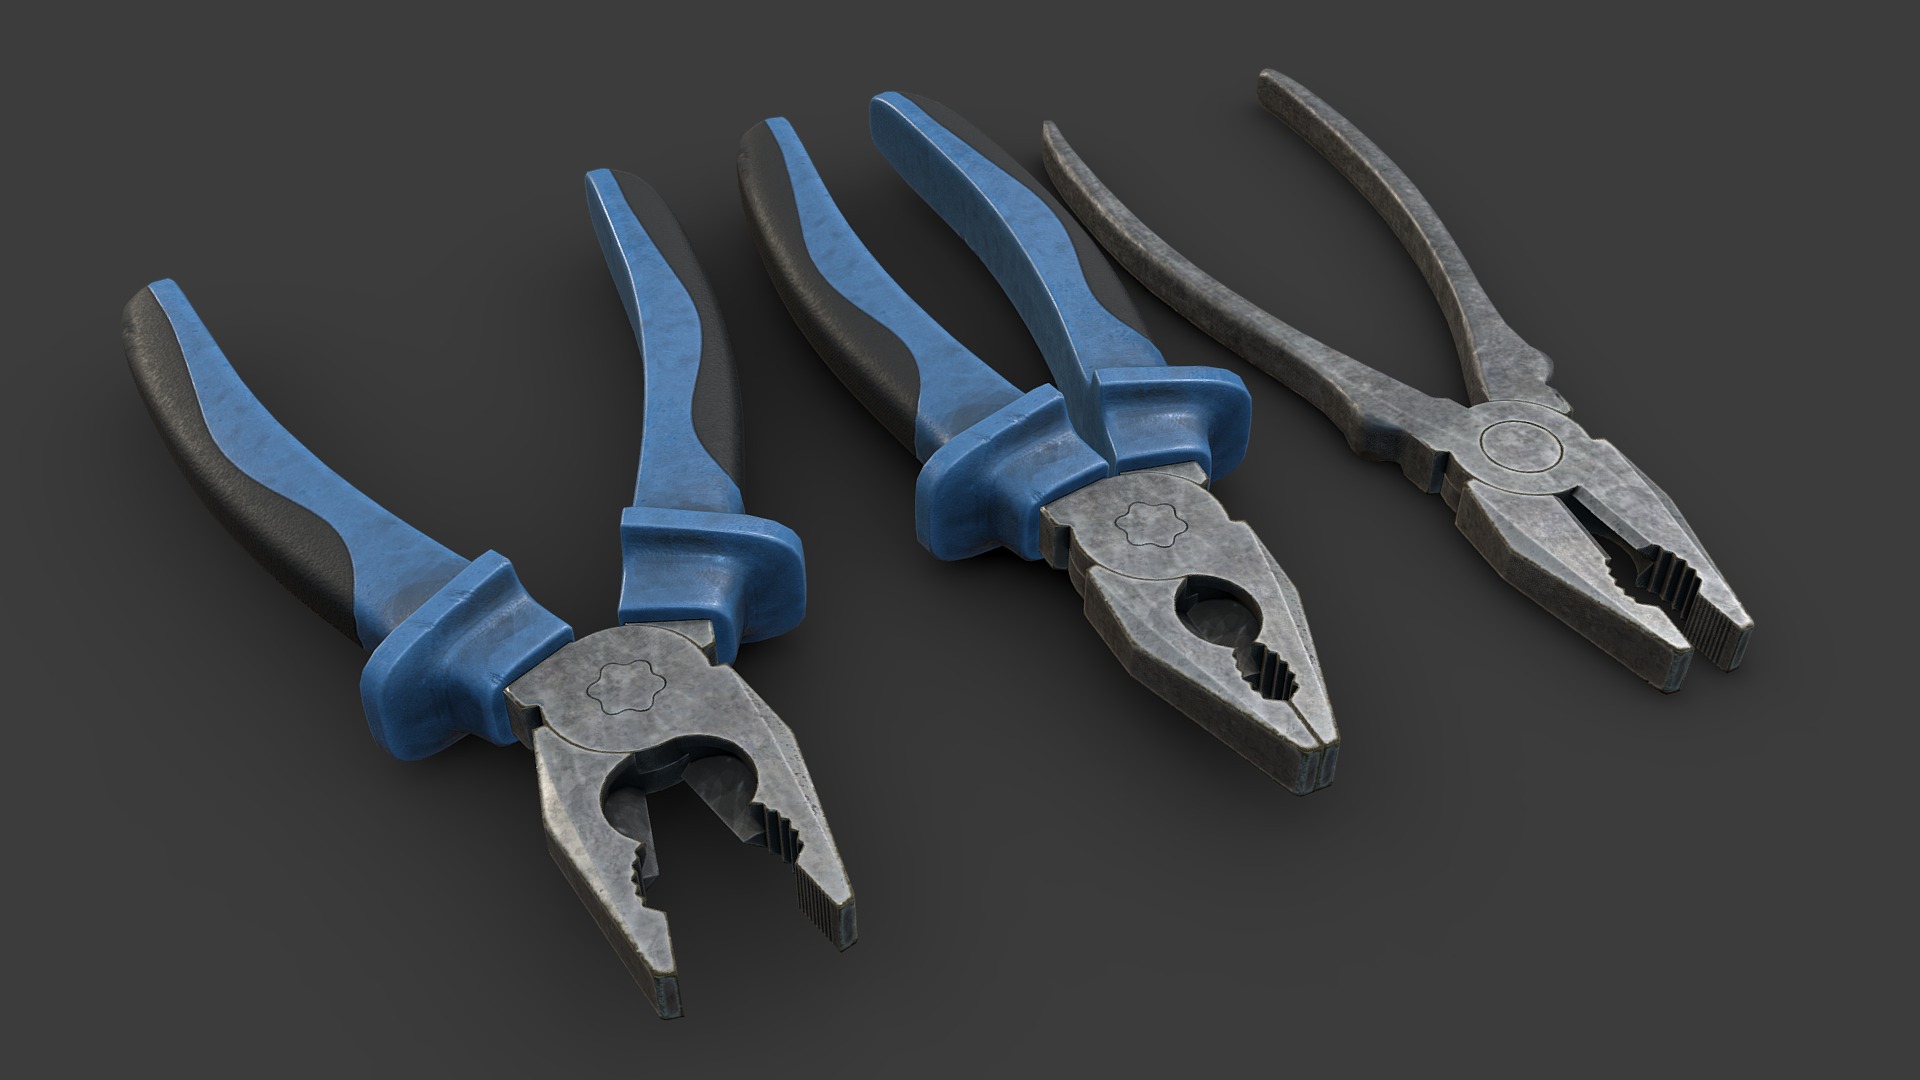 3D model Used Pliers - This is a 3D model of the Used Pliers. The 3D model is about a group of blue and silver metal objects.